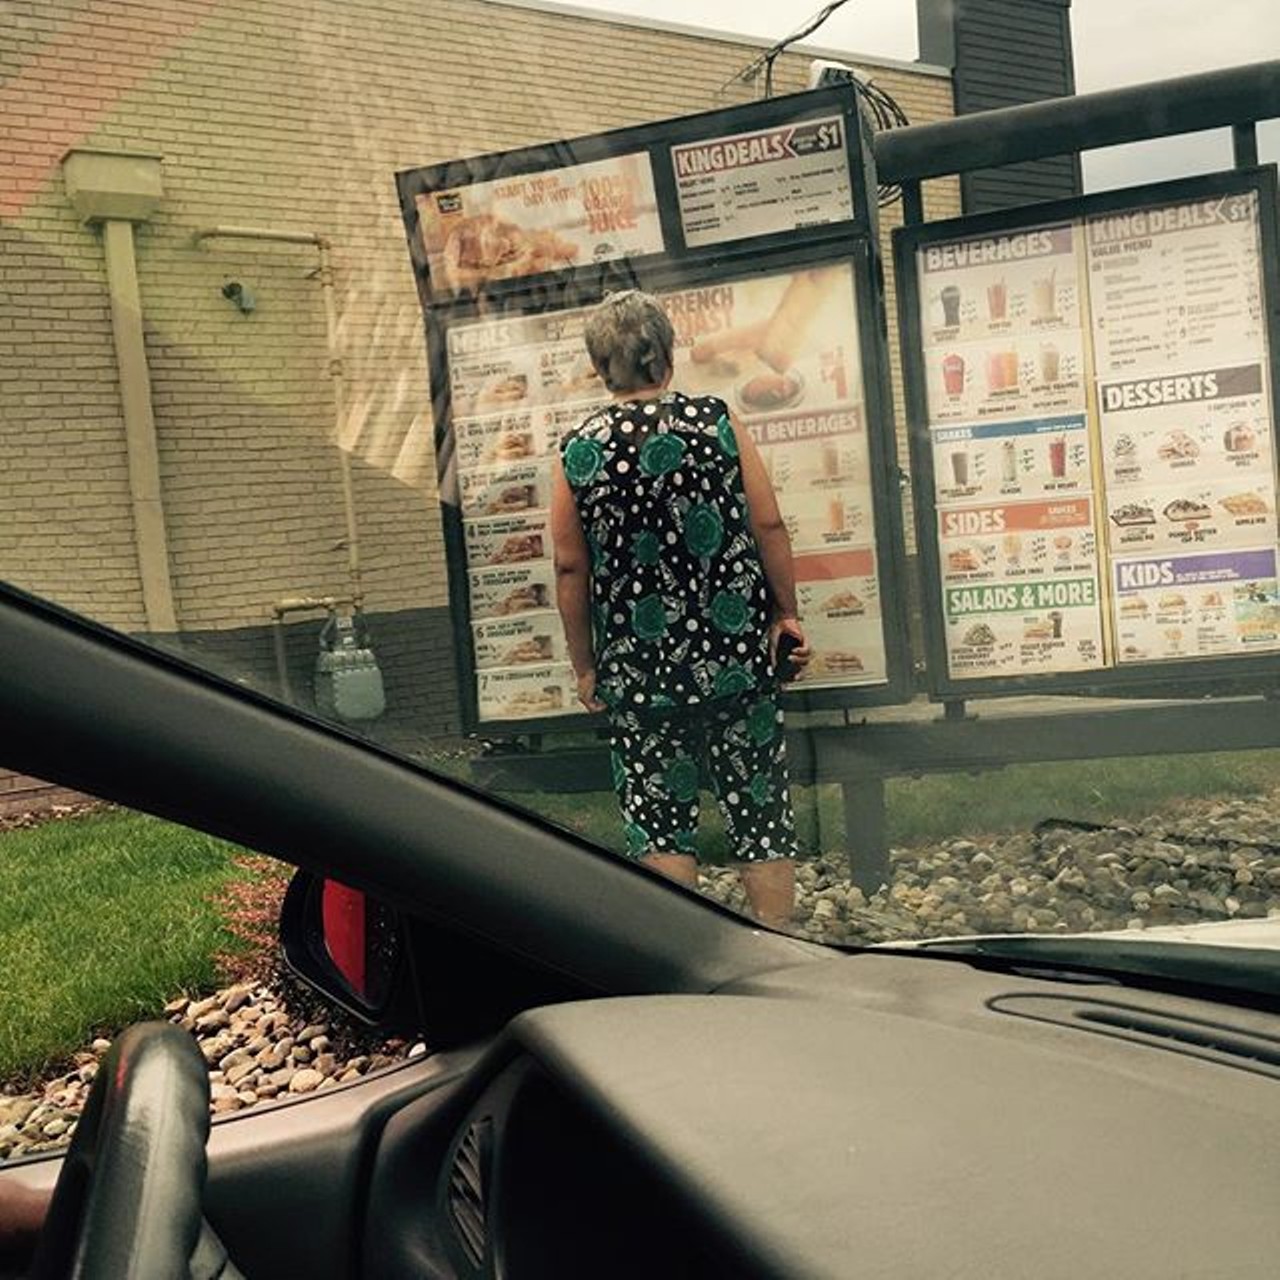 #onlyincleveland is driving through the drive-thru optional. @sirwill22